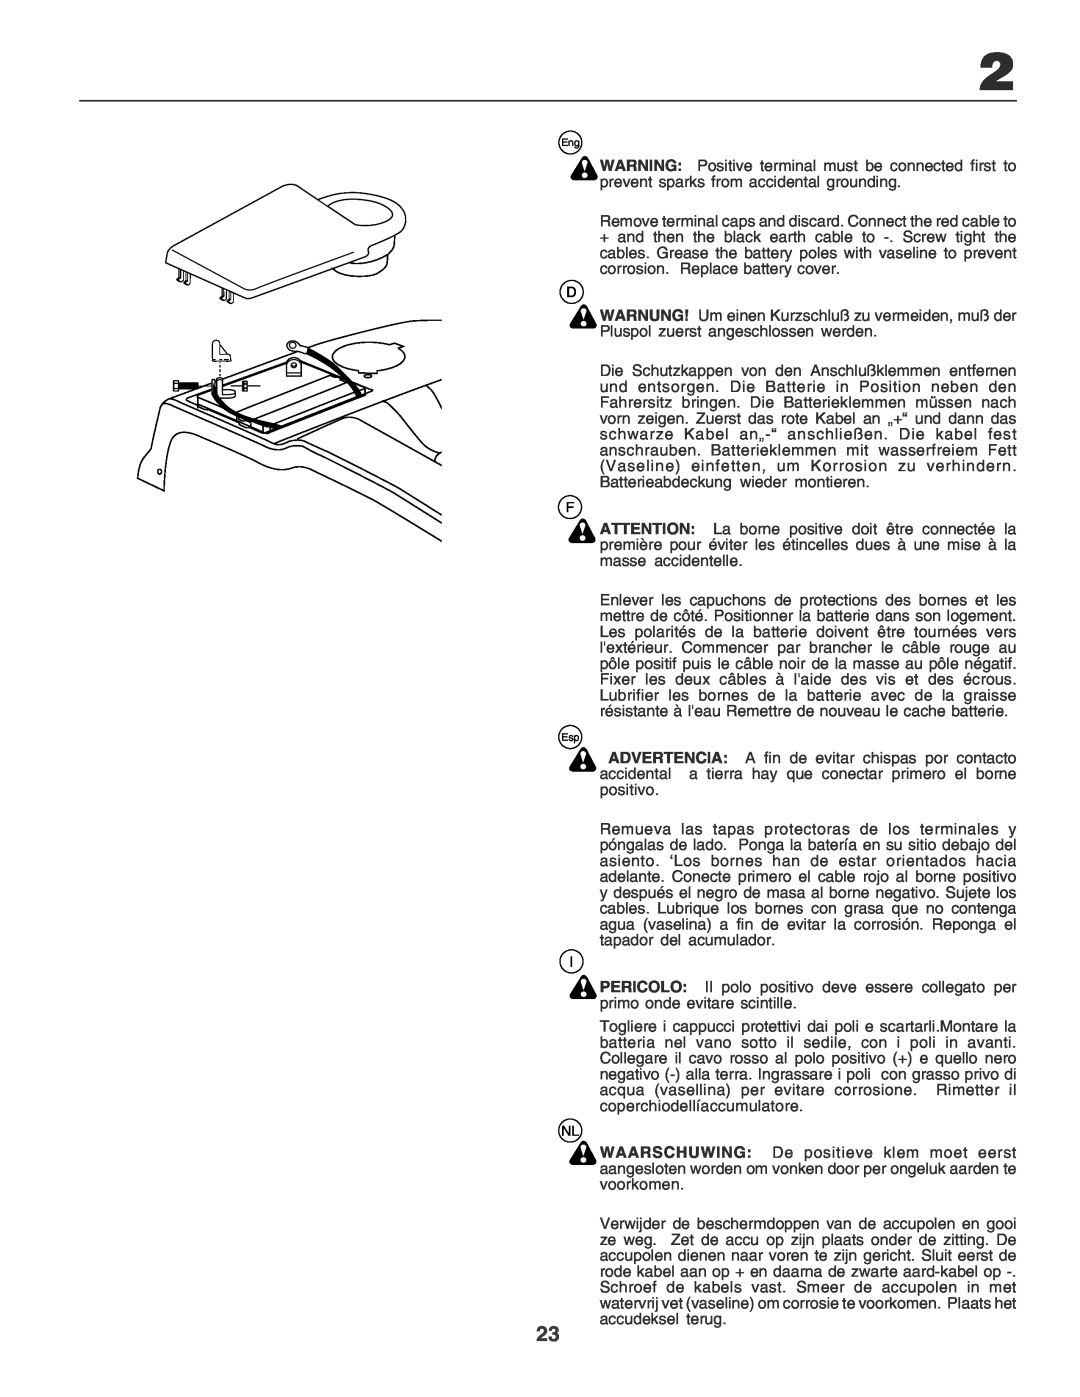 Husqvarna CTH170 instruction manual Remove terminal caps and discard. Connect the red cable to 